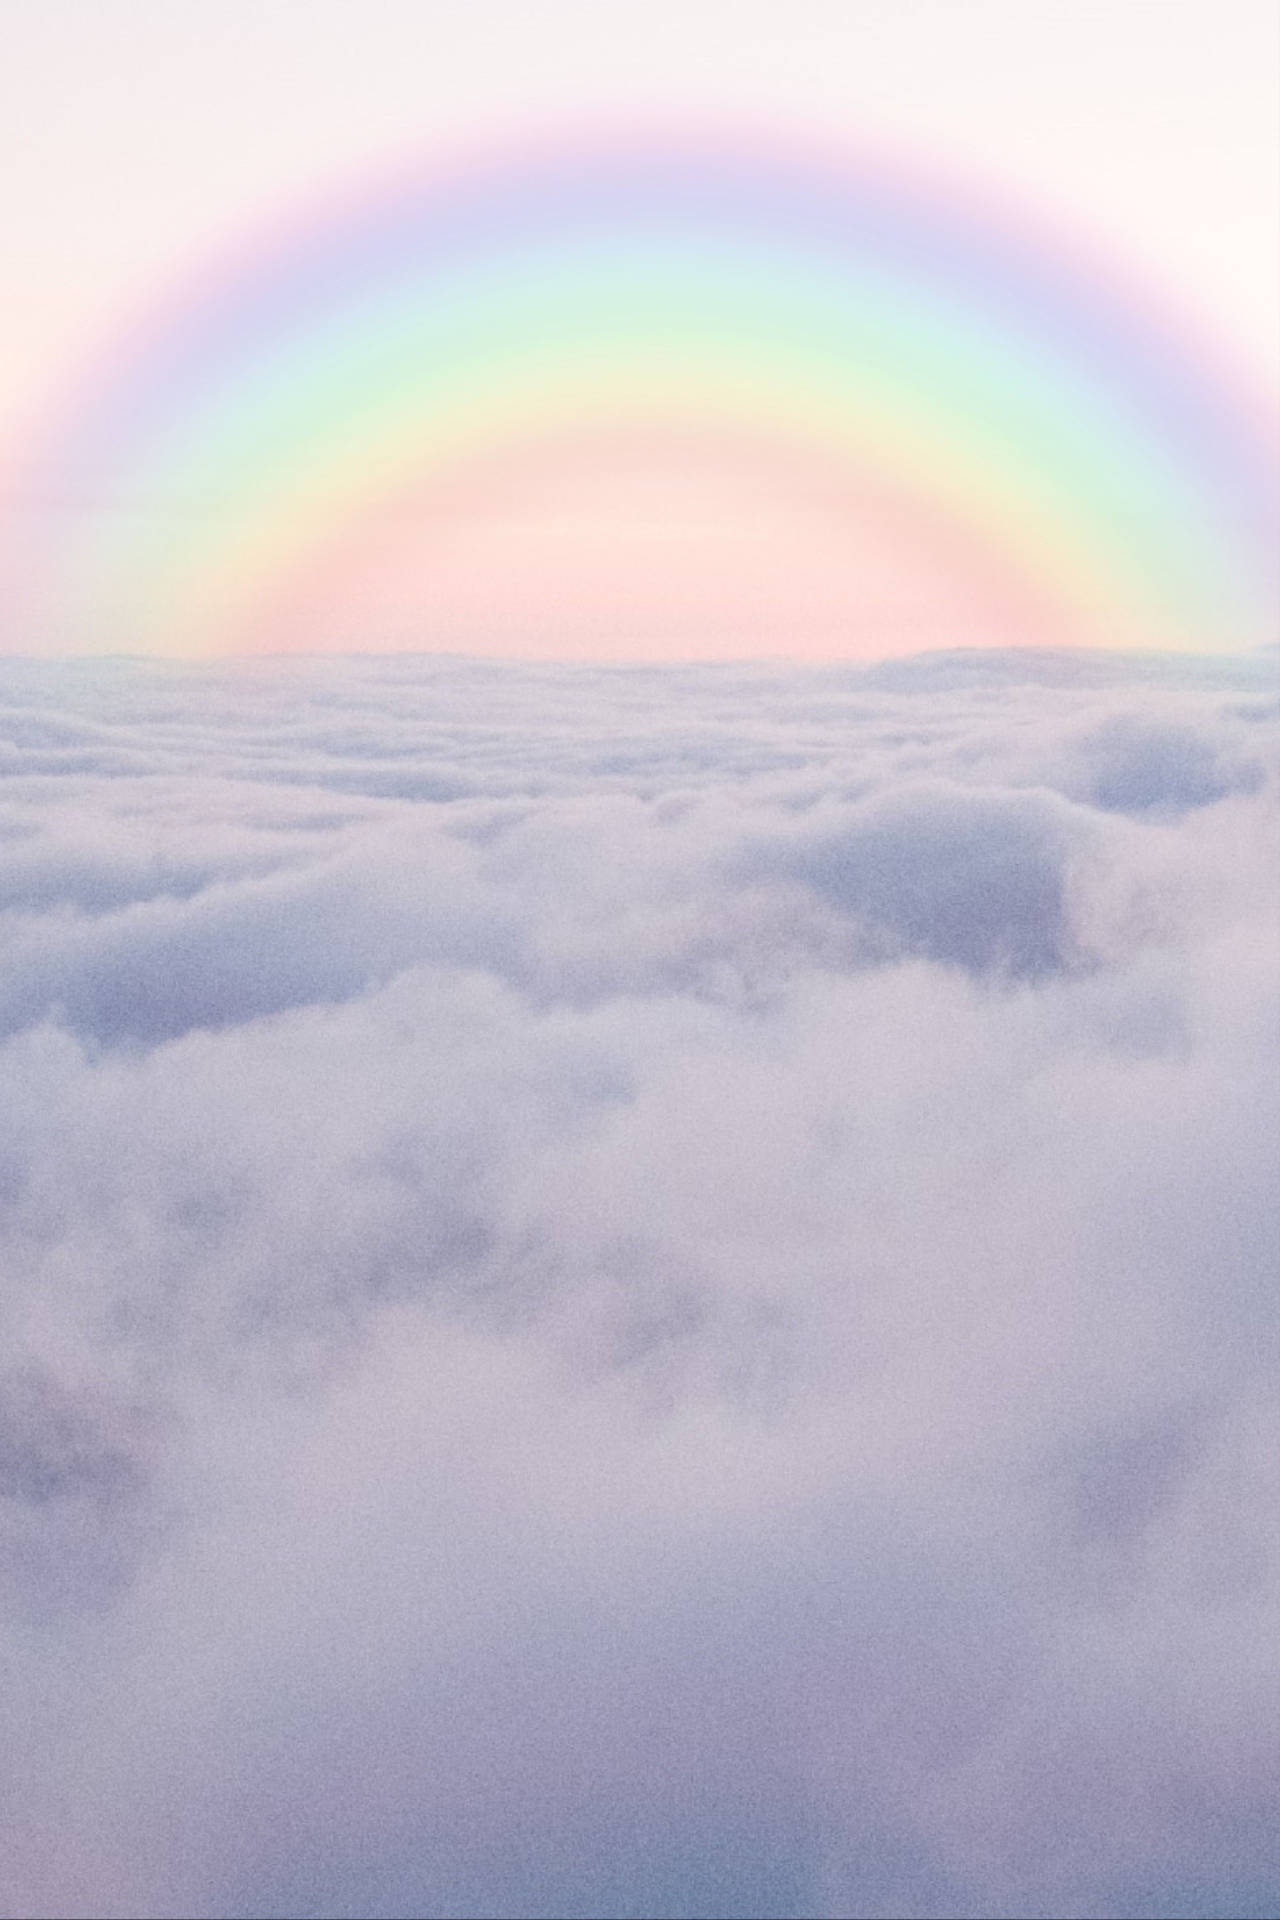 Sea Of Clouds With Pastel Rainbow Background